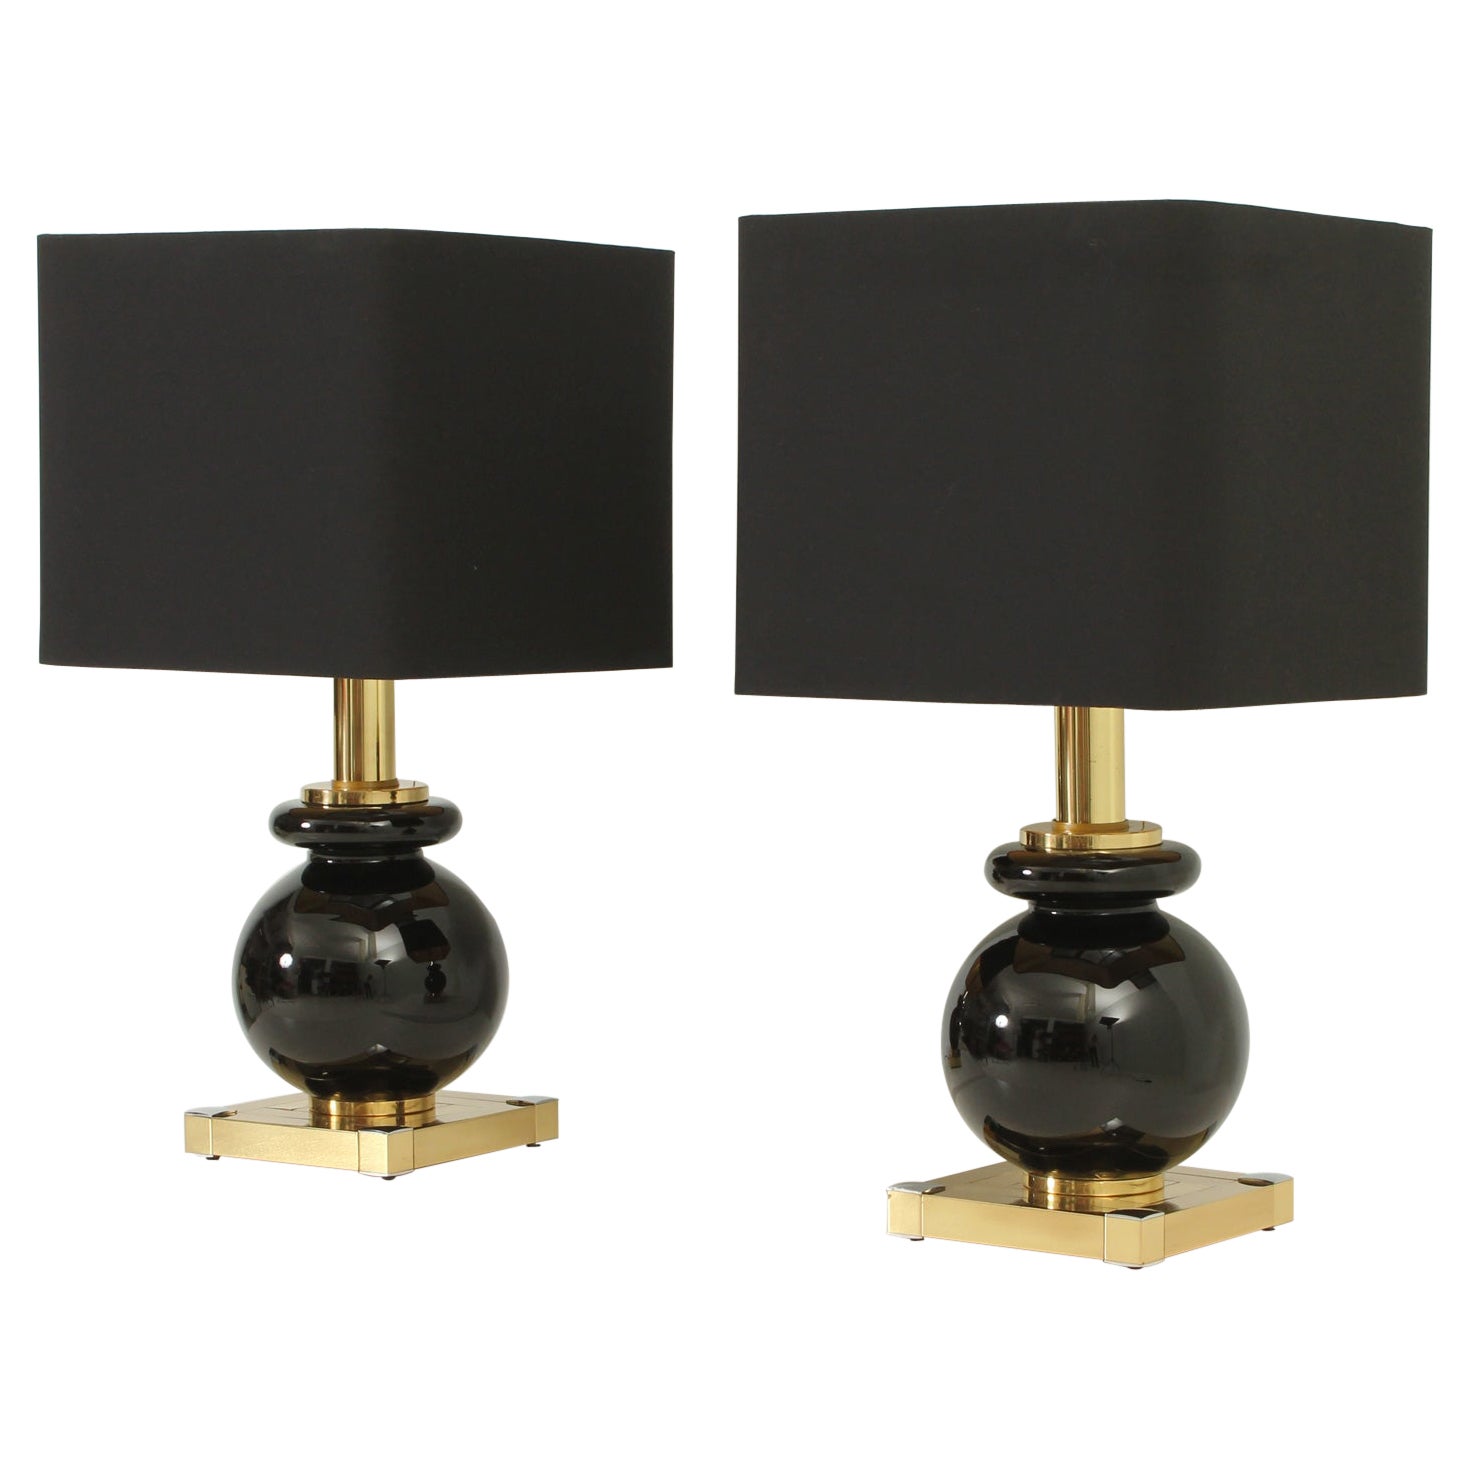 Pair of Lumica Table Lamps in Brass and Glass, Spain, 1970's For Sale